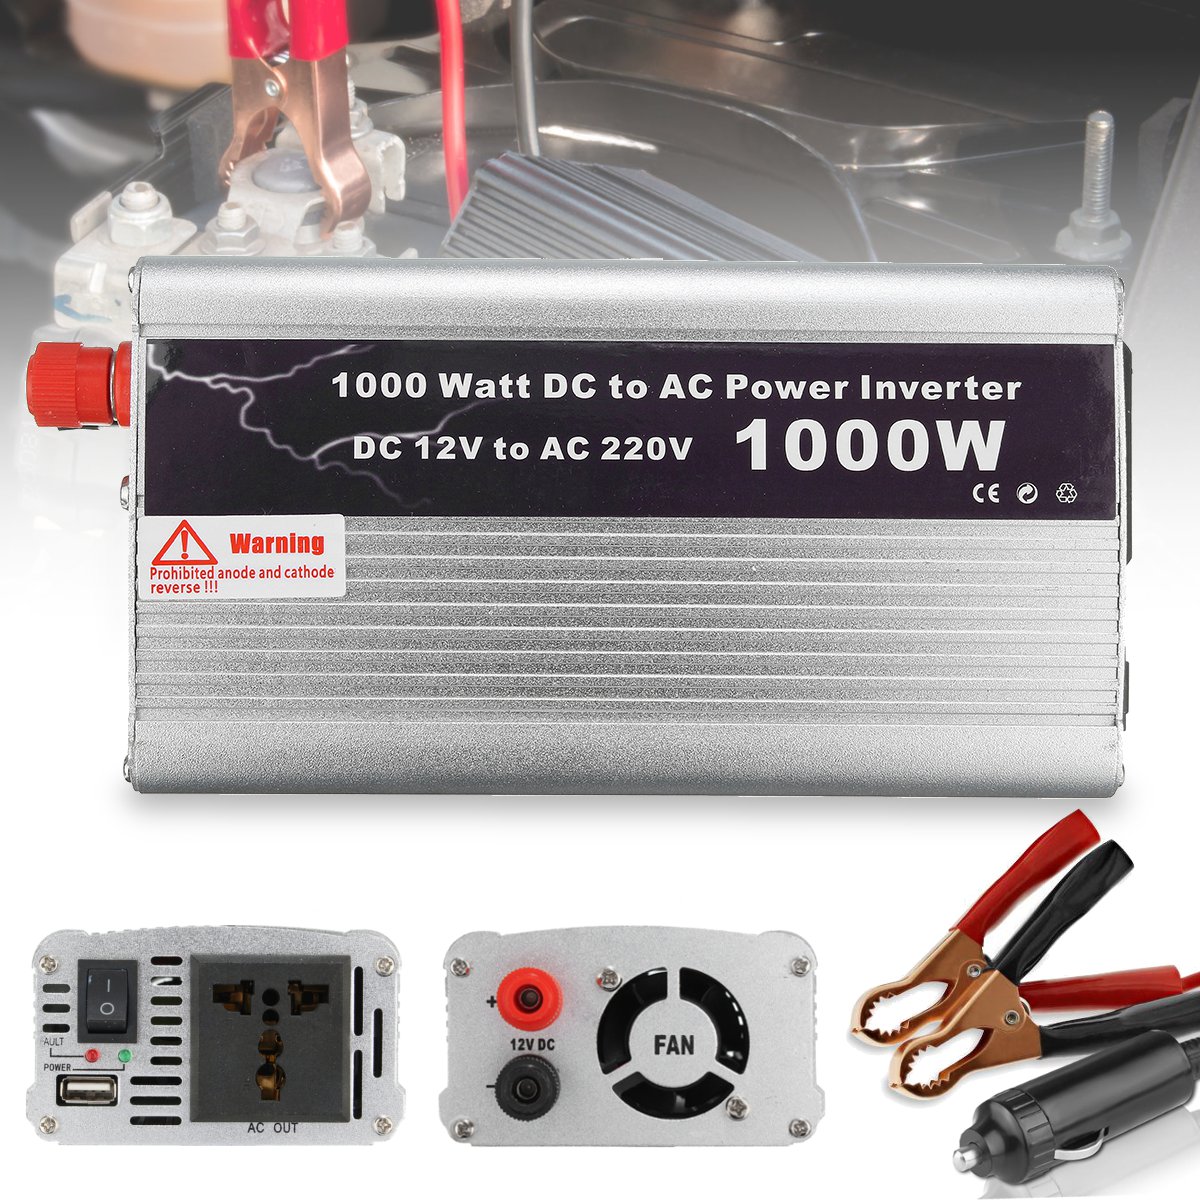 1000W-Modified-Sine-Wave-Power-Inverter-DC-12V-to-AC-220V-USB-Charger-Adapter-1129017